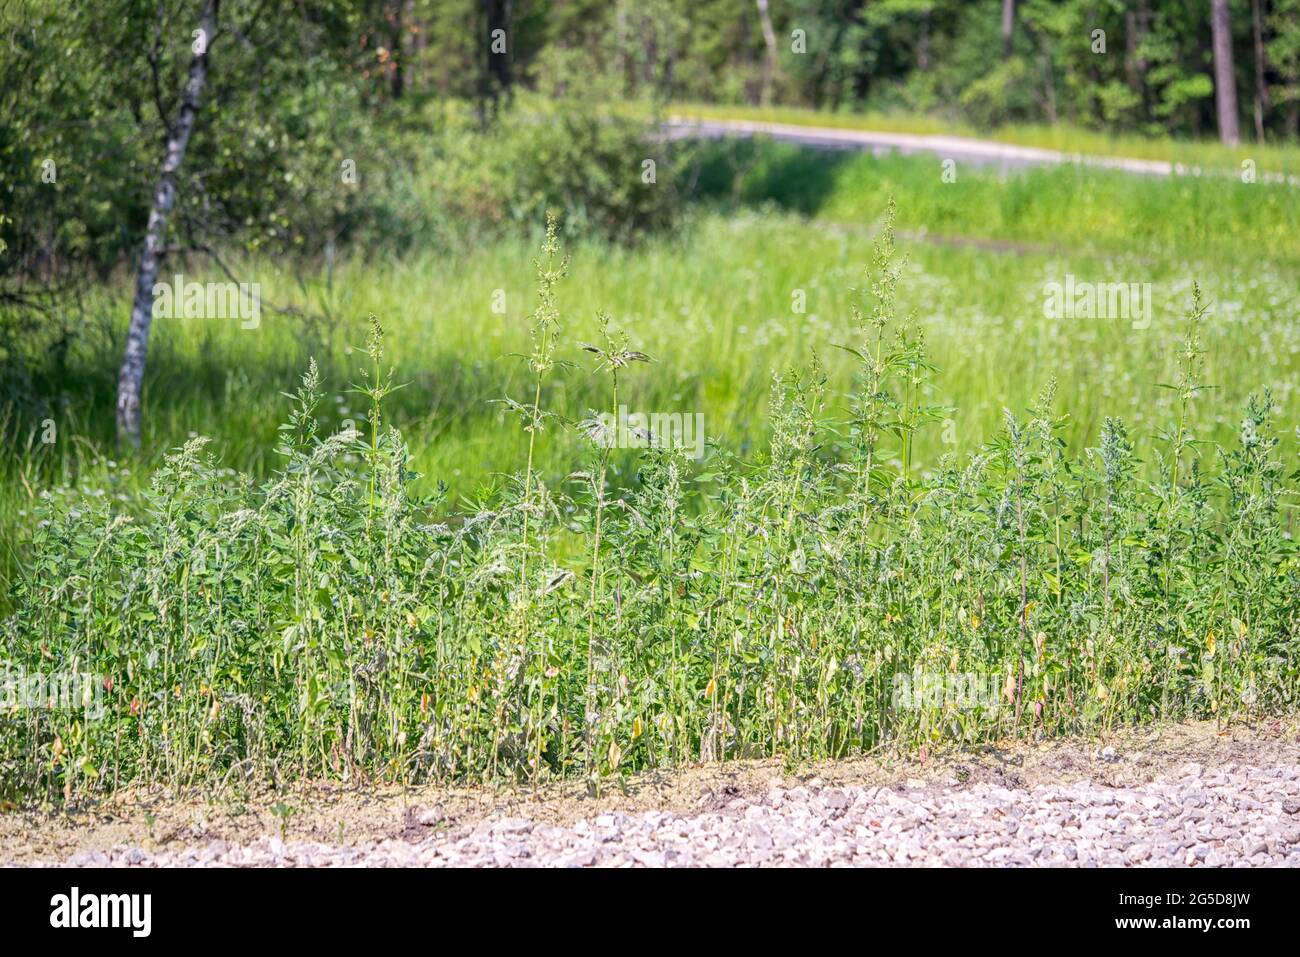 Sprayed weeds with marihuana by the road. Fighting drugs. Stock Photo